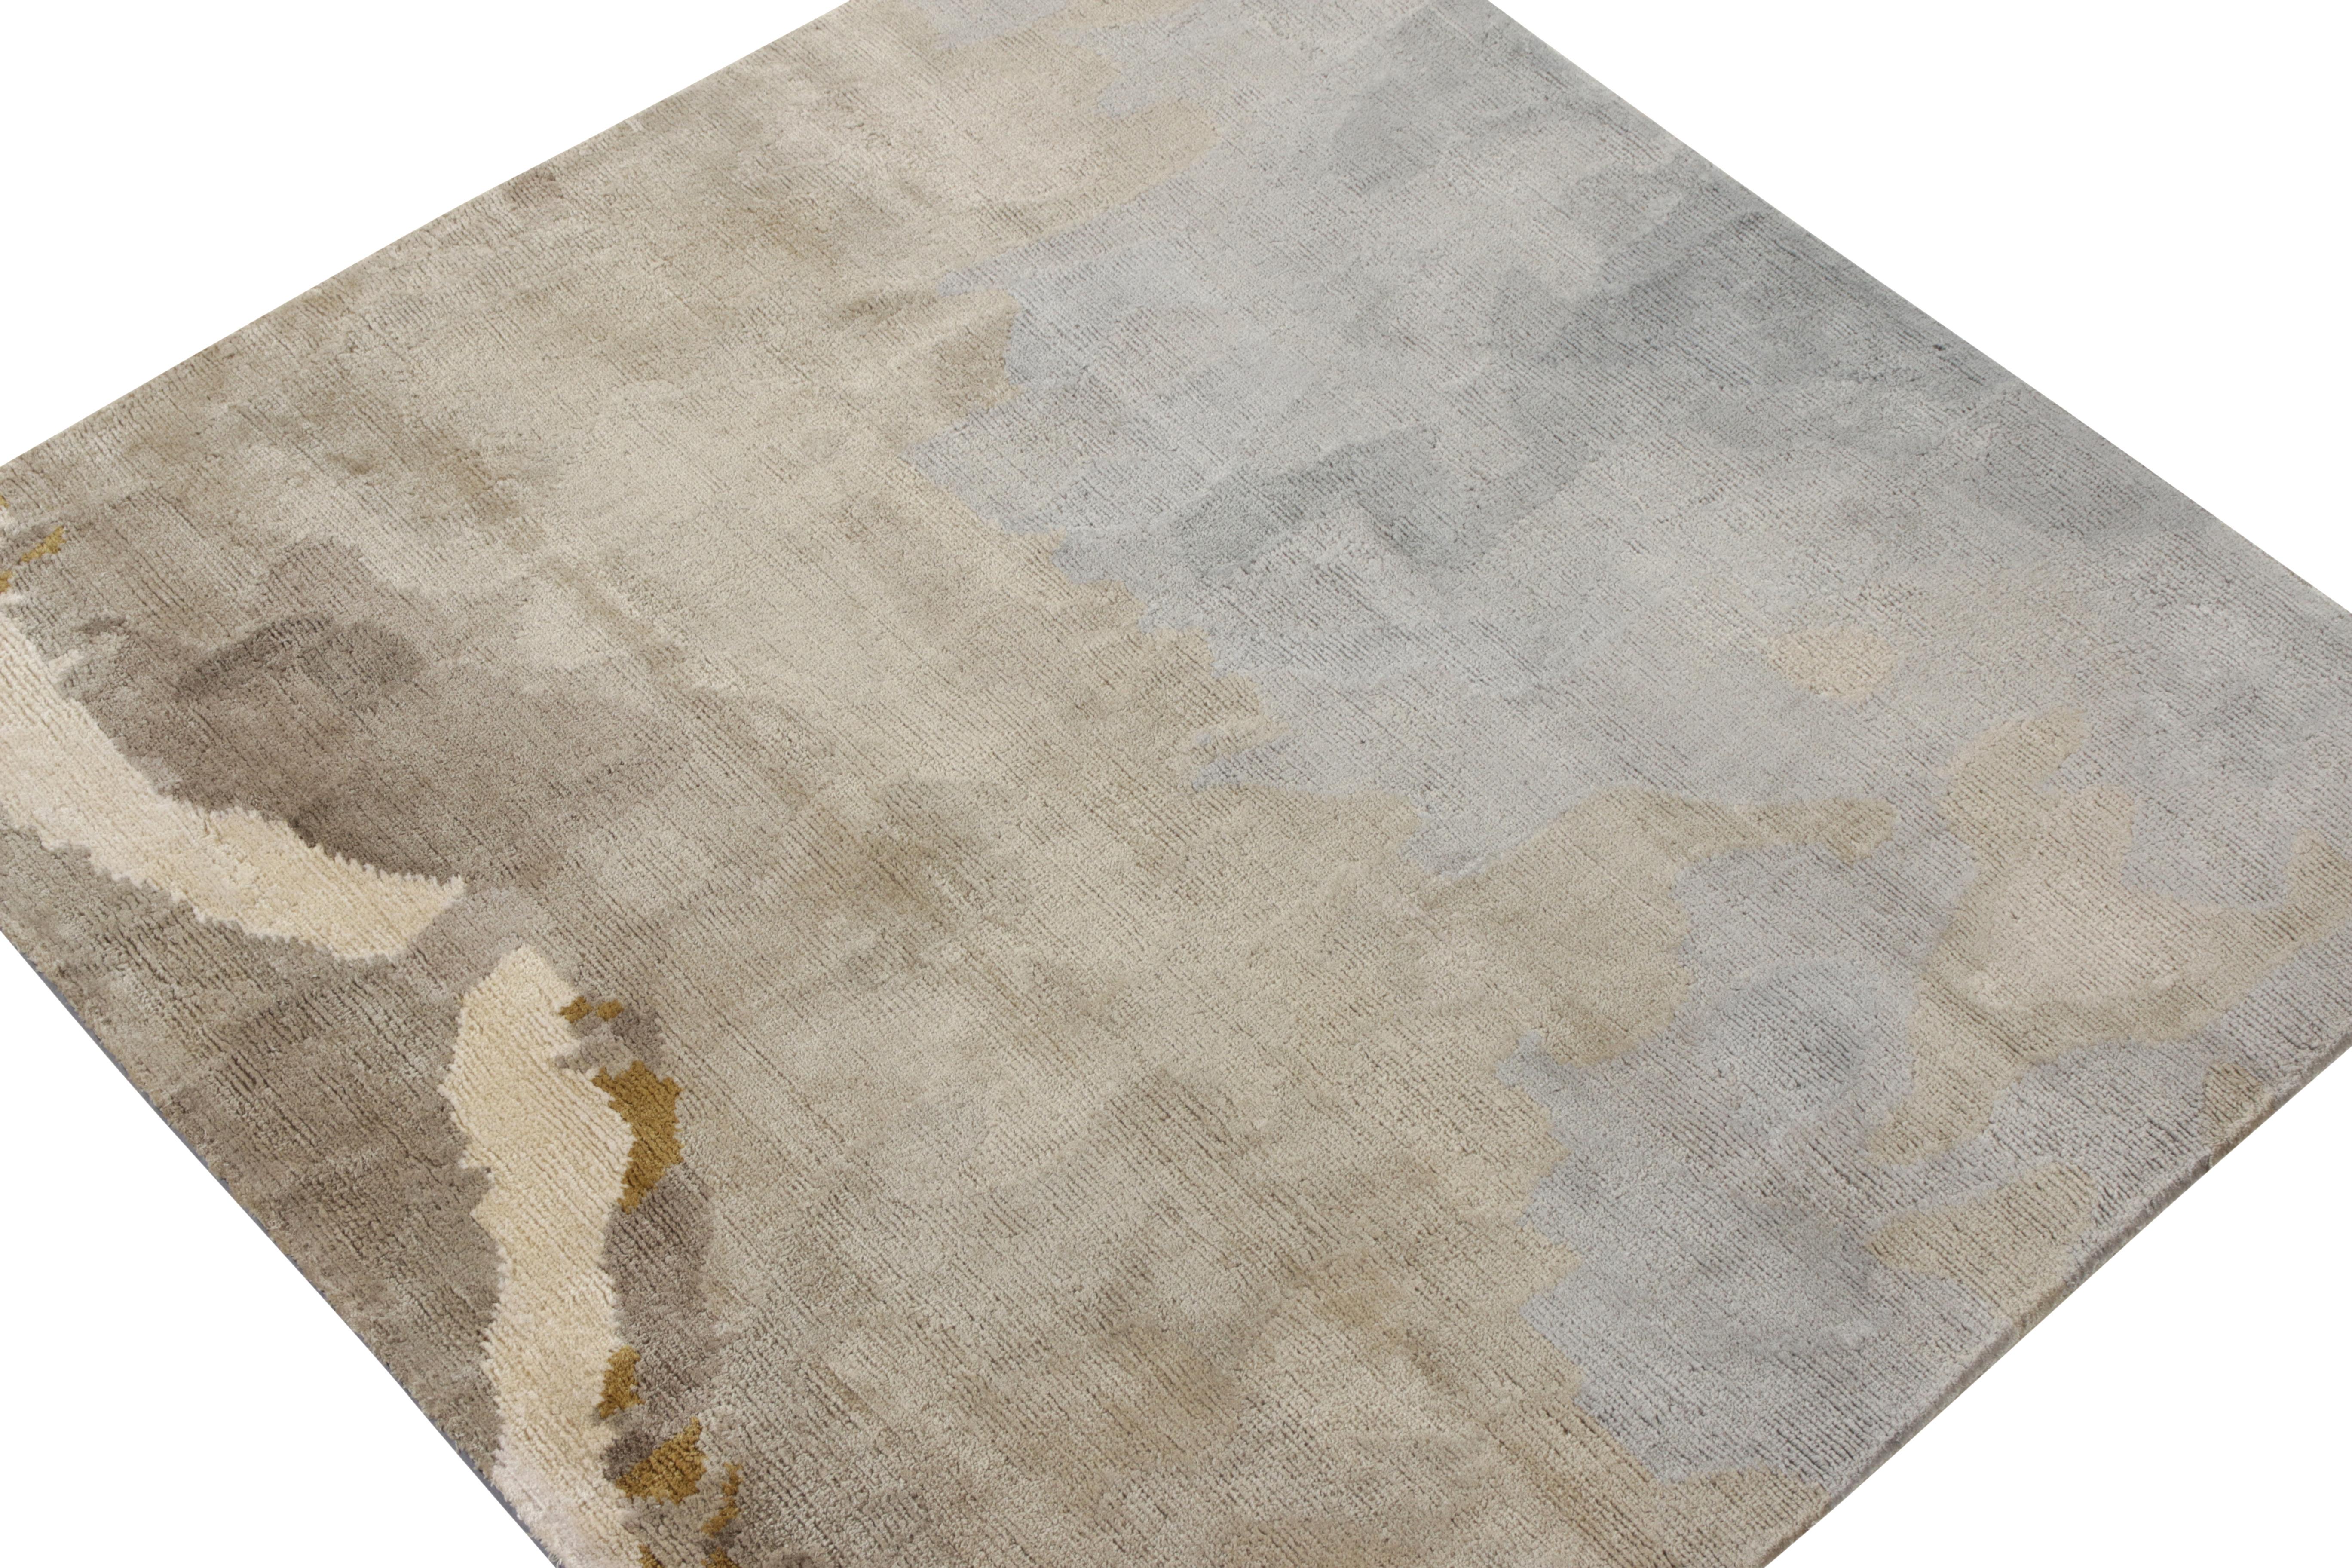 A square abstract accent rug from Rug & Kilim’s New & Modern Collection. The rug prevails in sophisticated tones of blue, silver-grey and off white juxtaposed by golden hints in the beige-brown background. The color tones ascend tastefully across